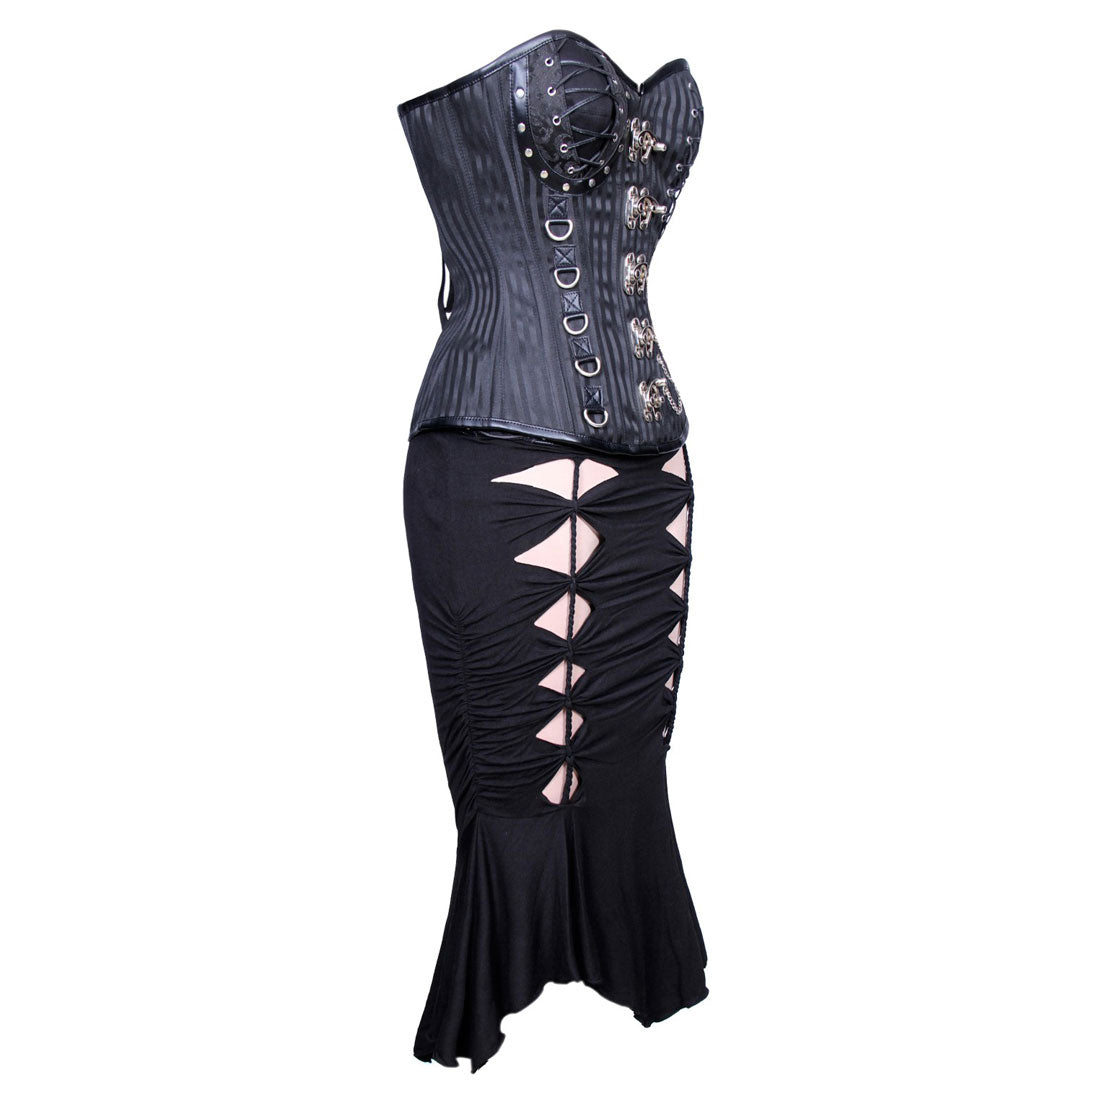 Cadence Gothic Authentic Steel Boned Overbust Corset Dress